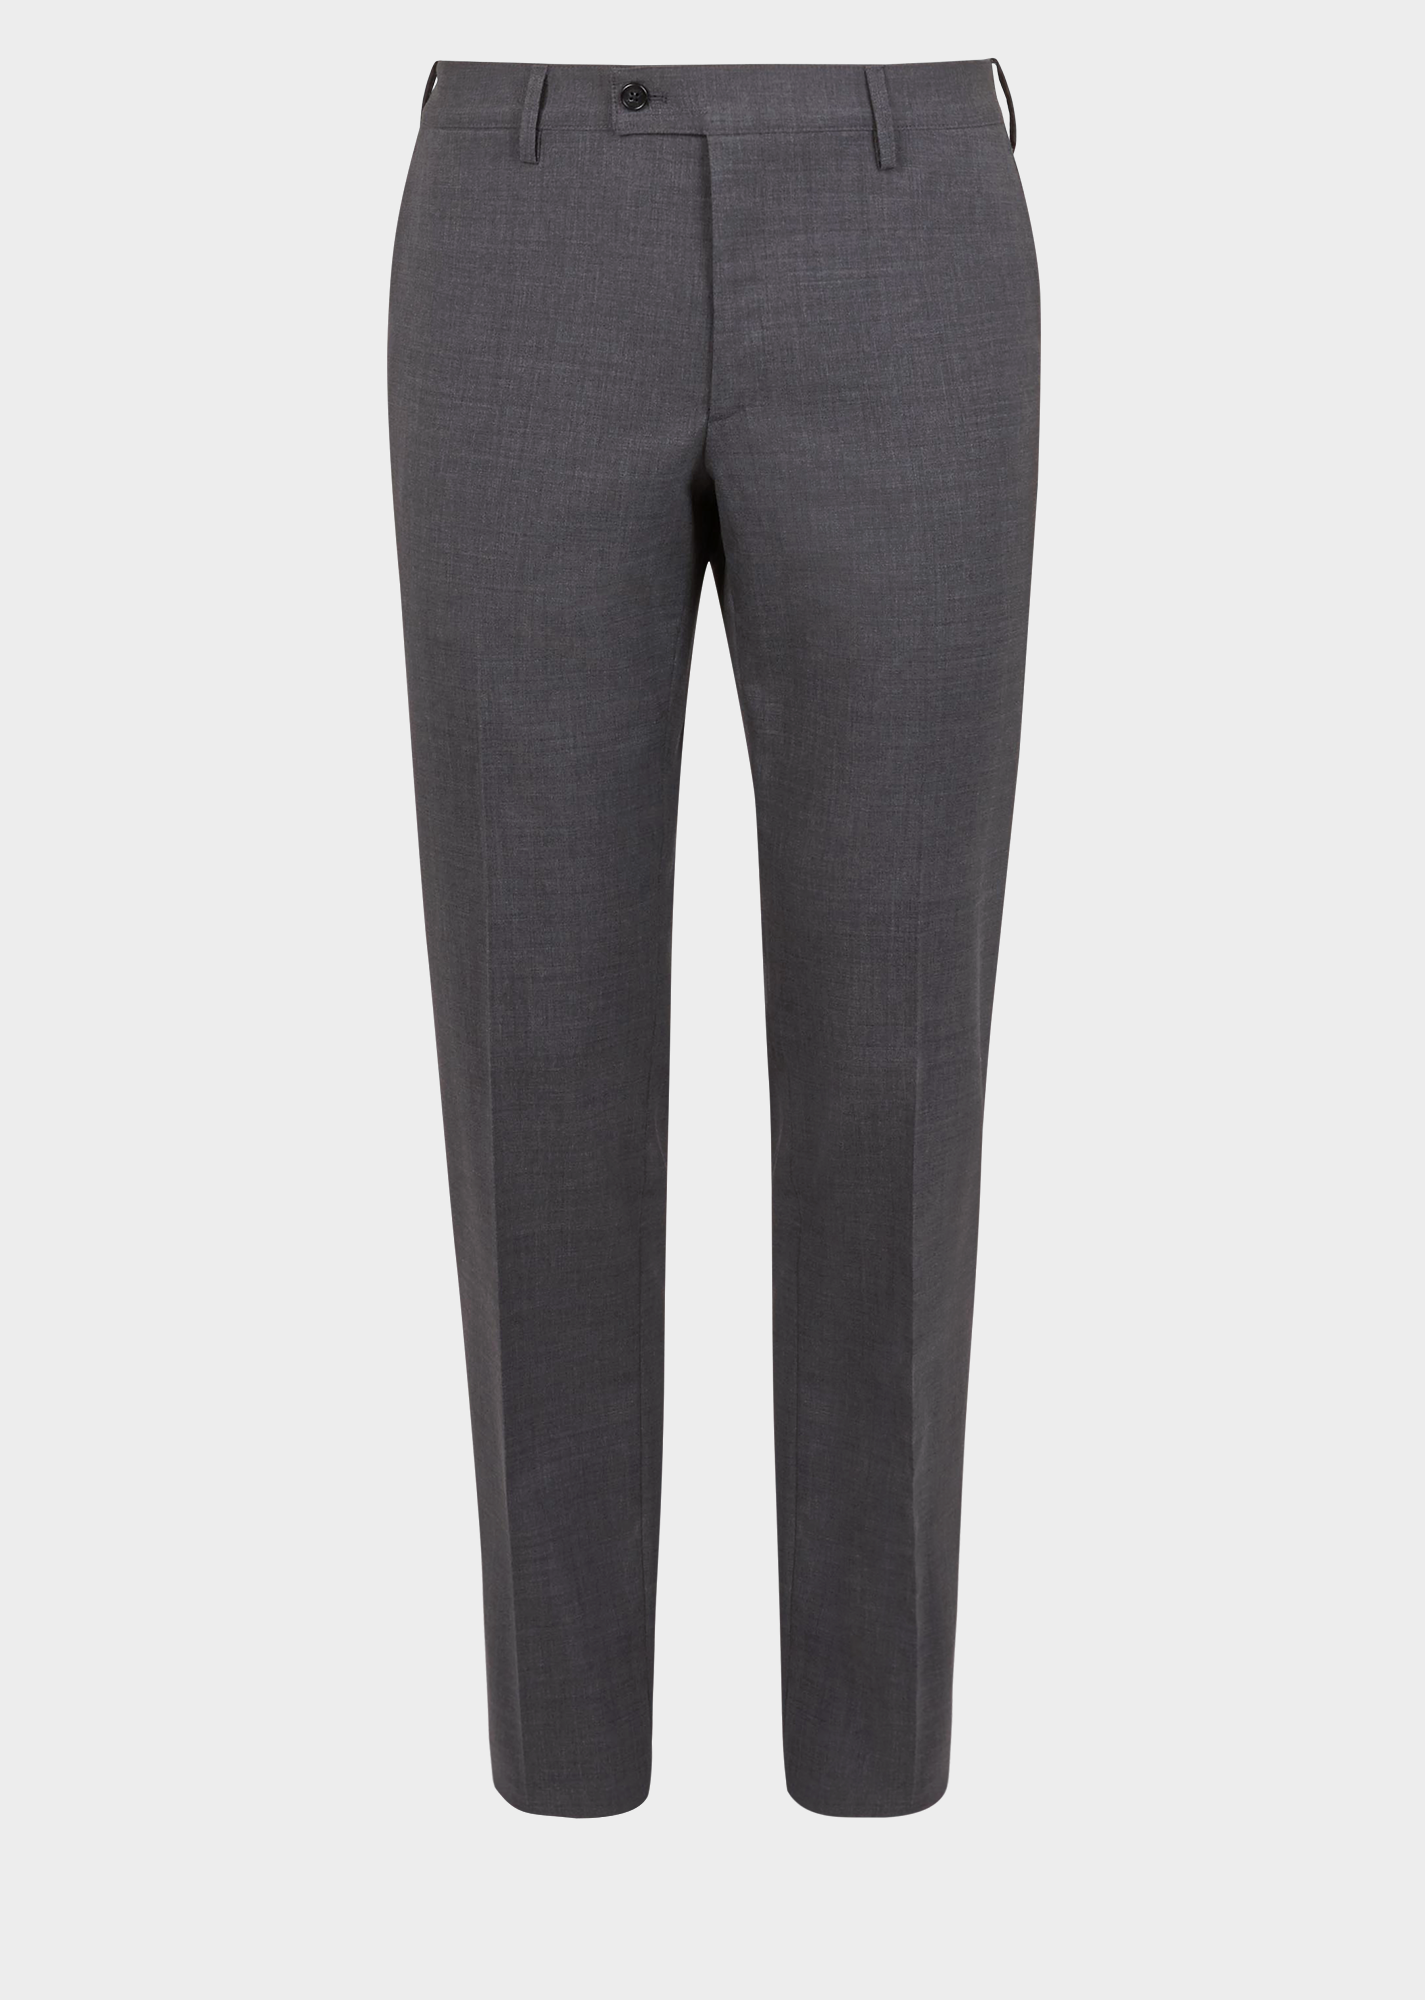 Synergie Trouser Navy